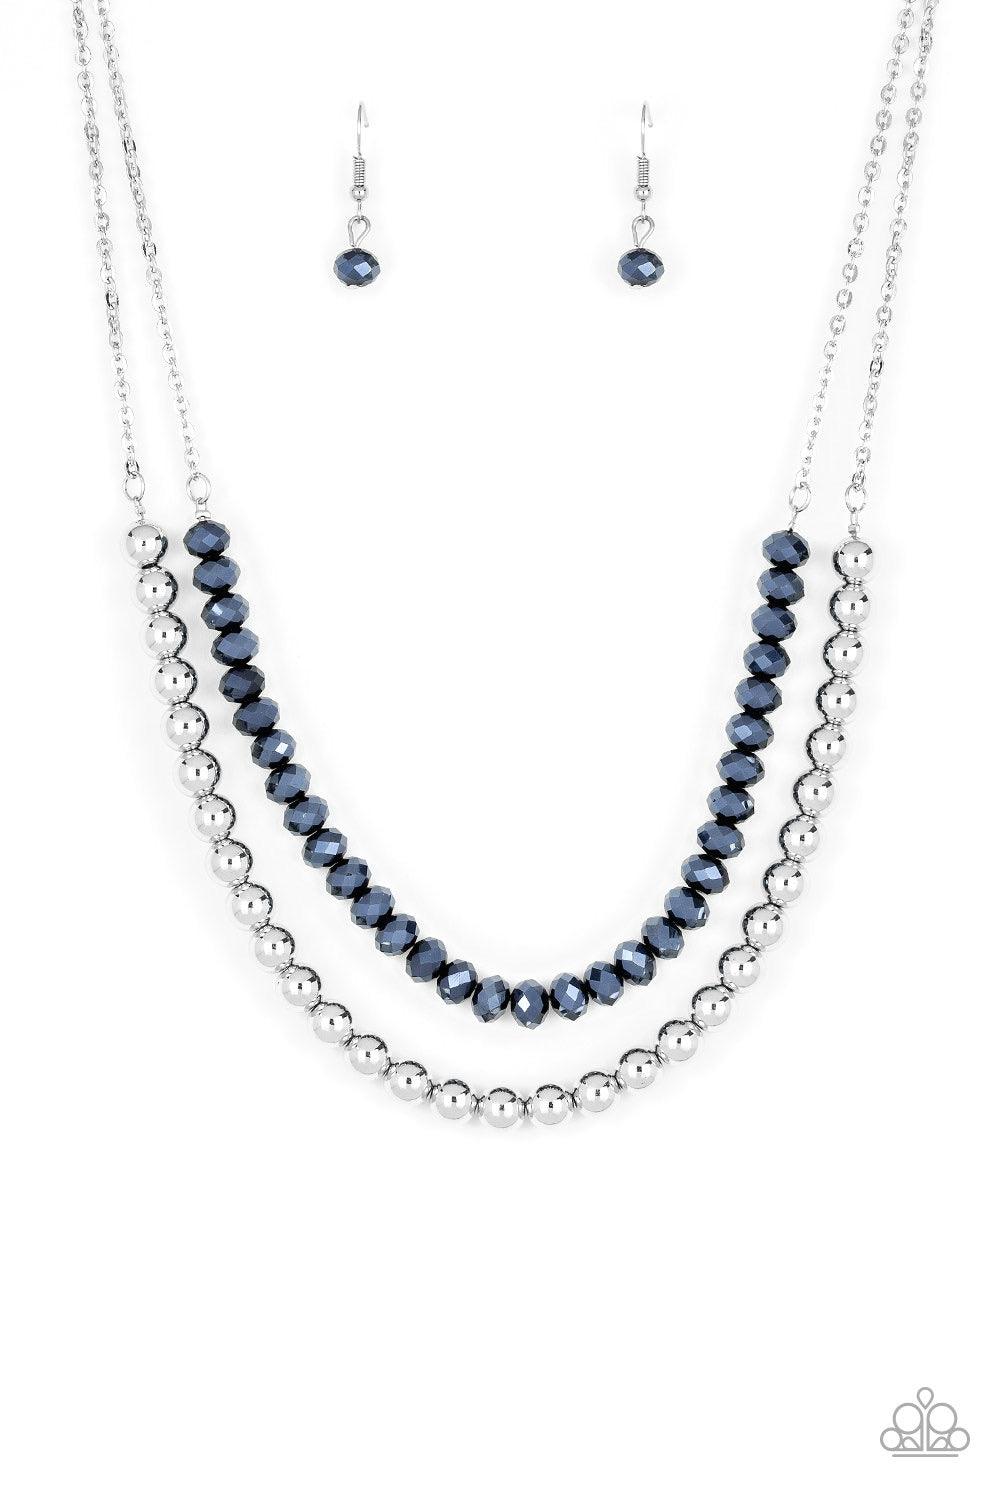 Paparazzi Accessories Color of the Day - Blue Dipped in a metallic shimmer, a strand of glittery blue crystal-like beads gives way to a strand of shiny silver beads below the collar for a colorfully layered look. Features an adjustable clasp closure. Jewe